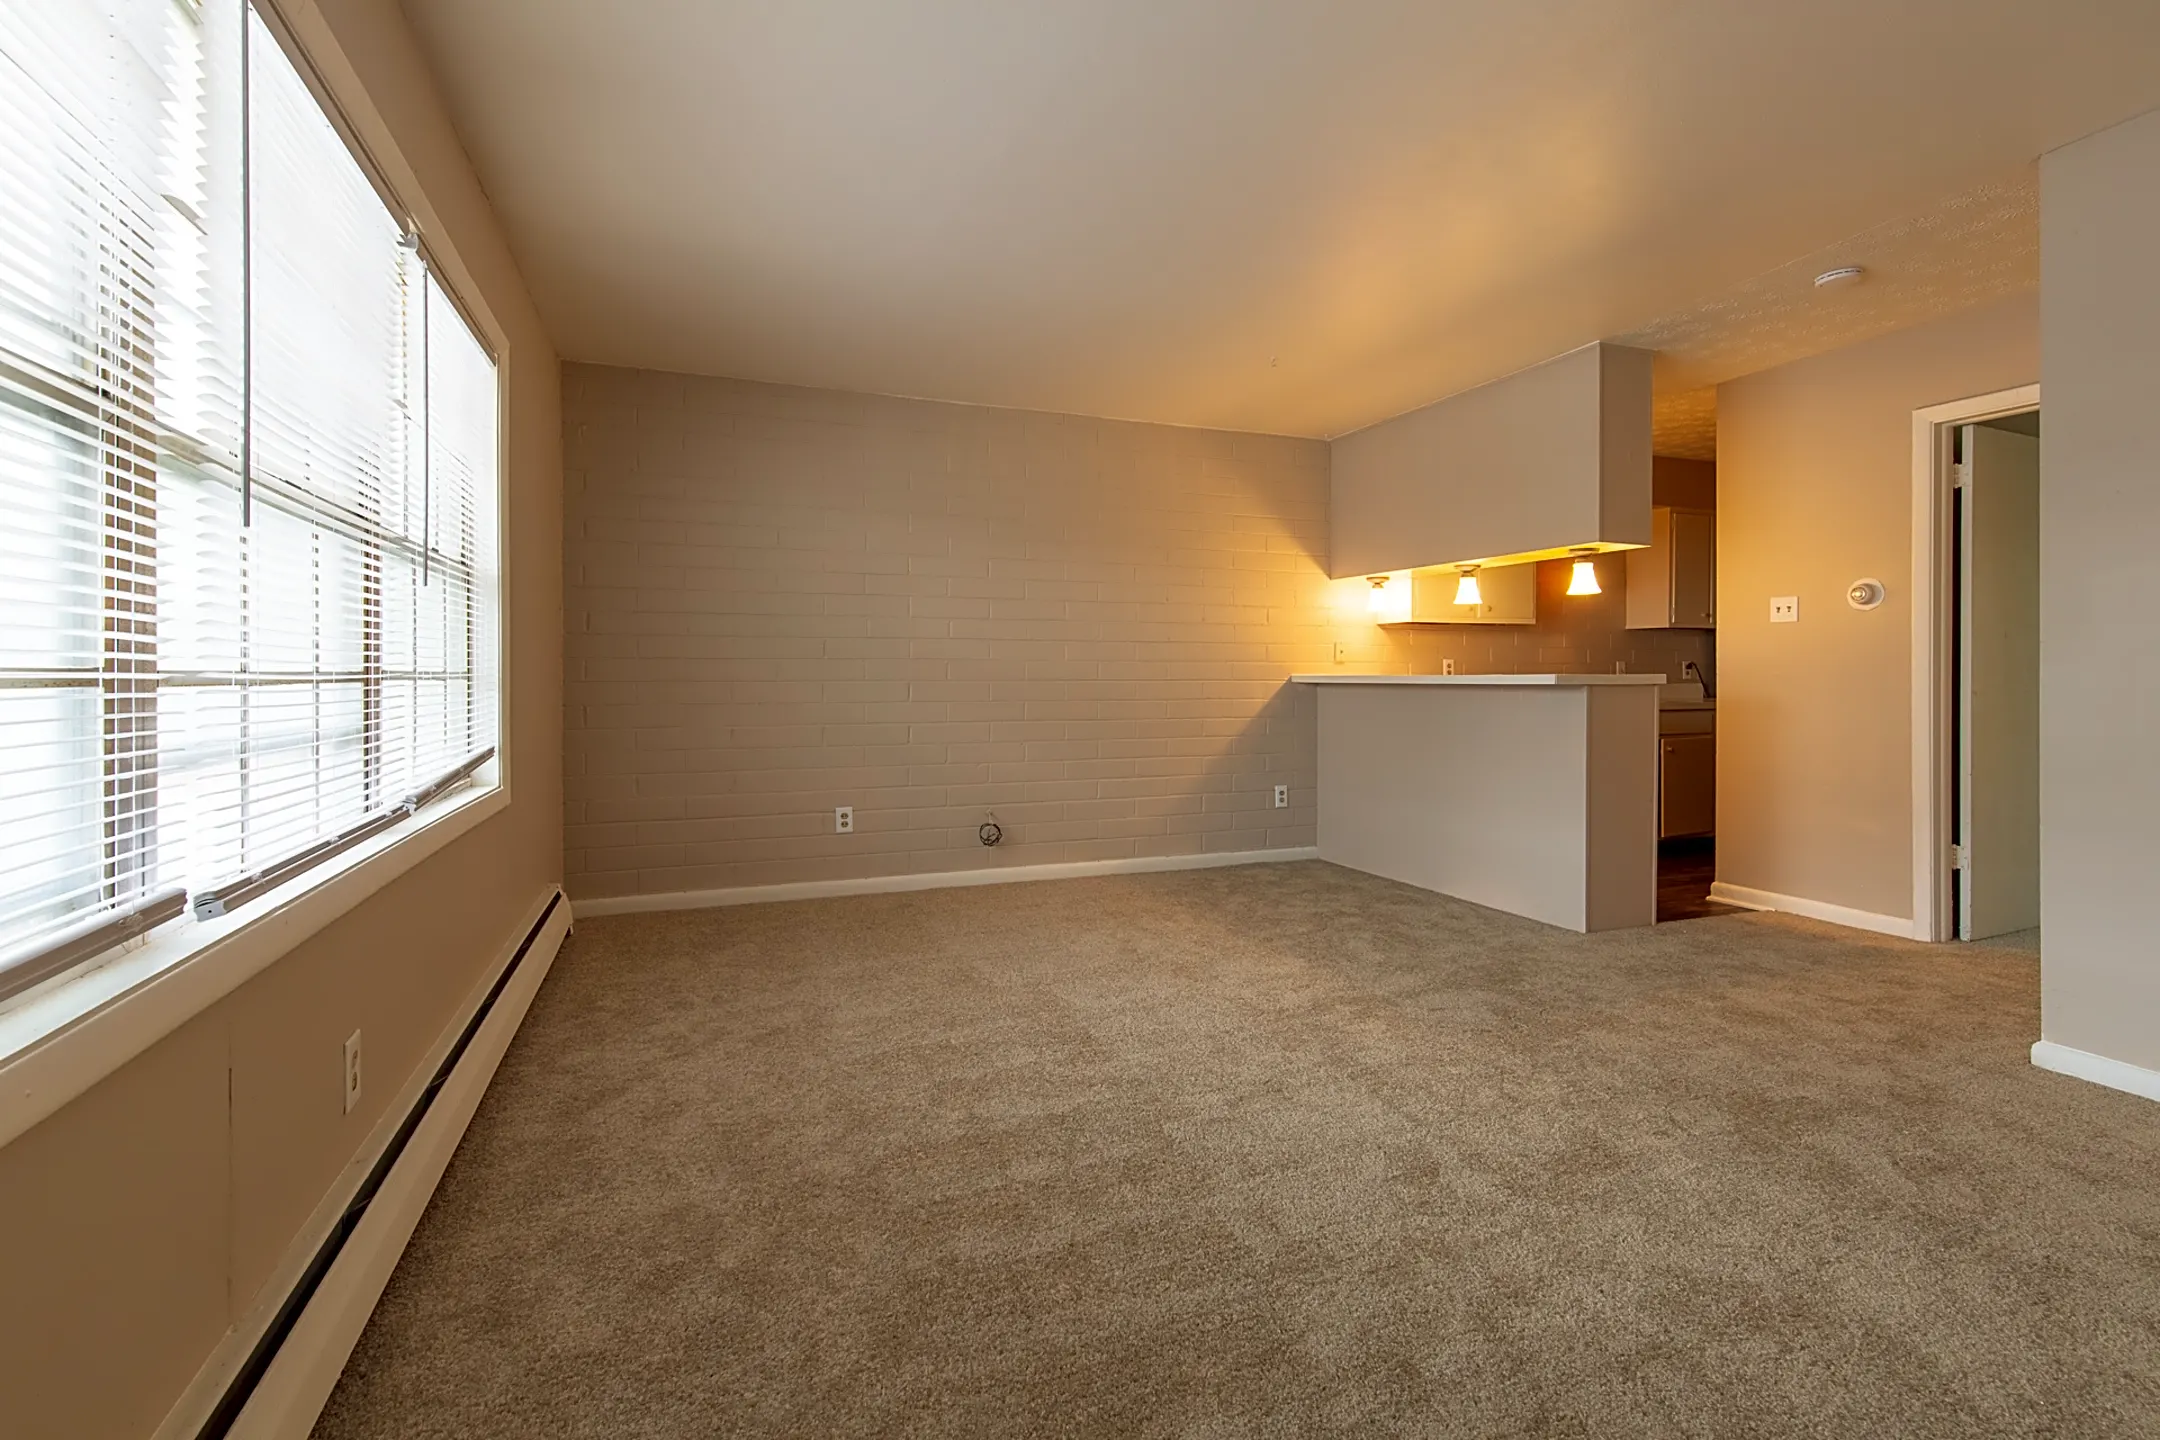 Living Room - InTempus Property Management - Indianapolis, IN